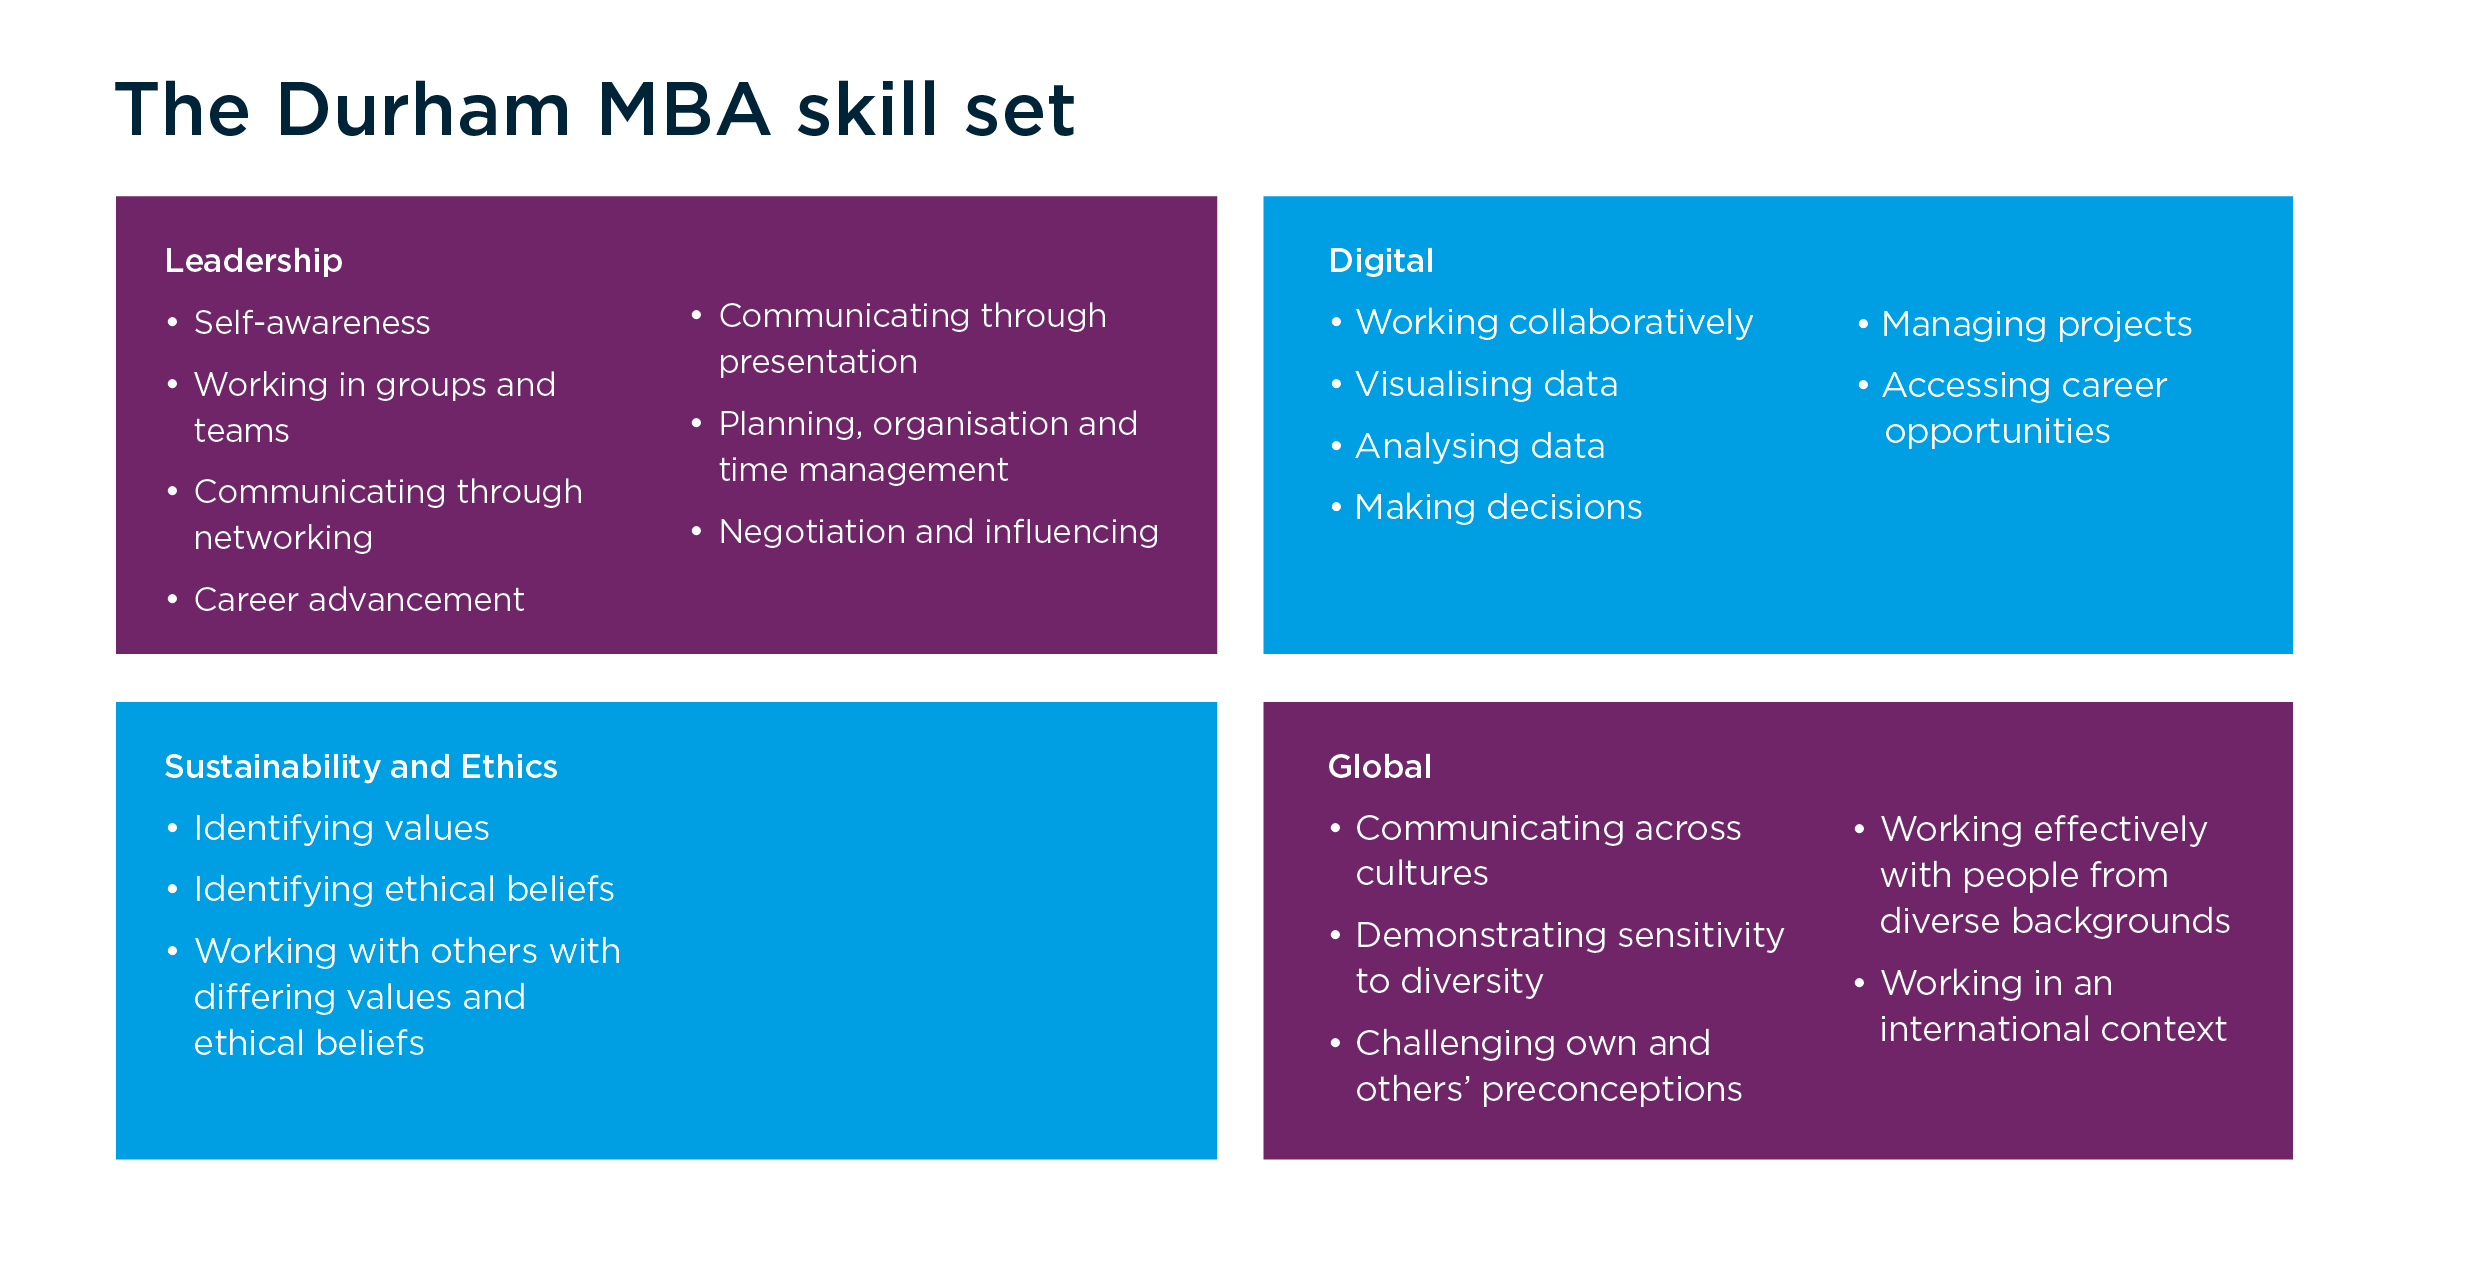 Diagram showing the Durham MBA skill set